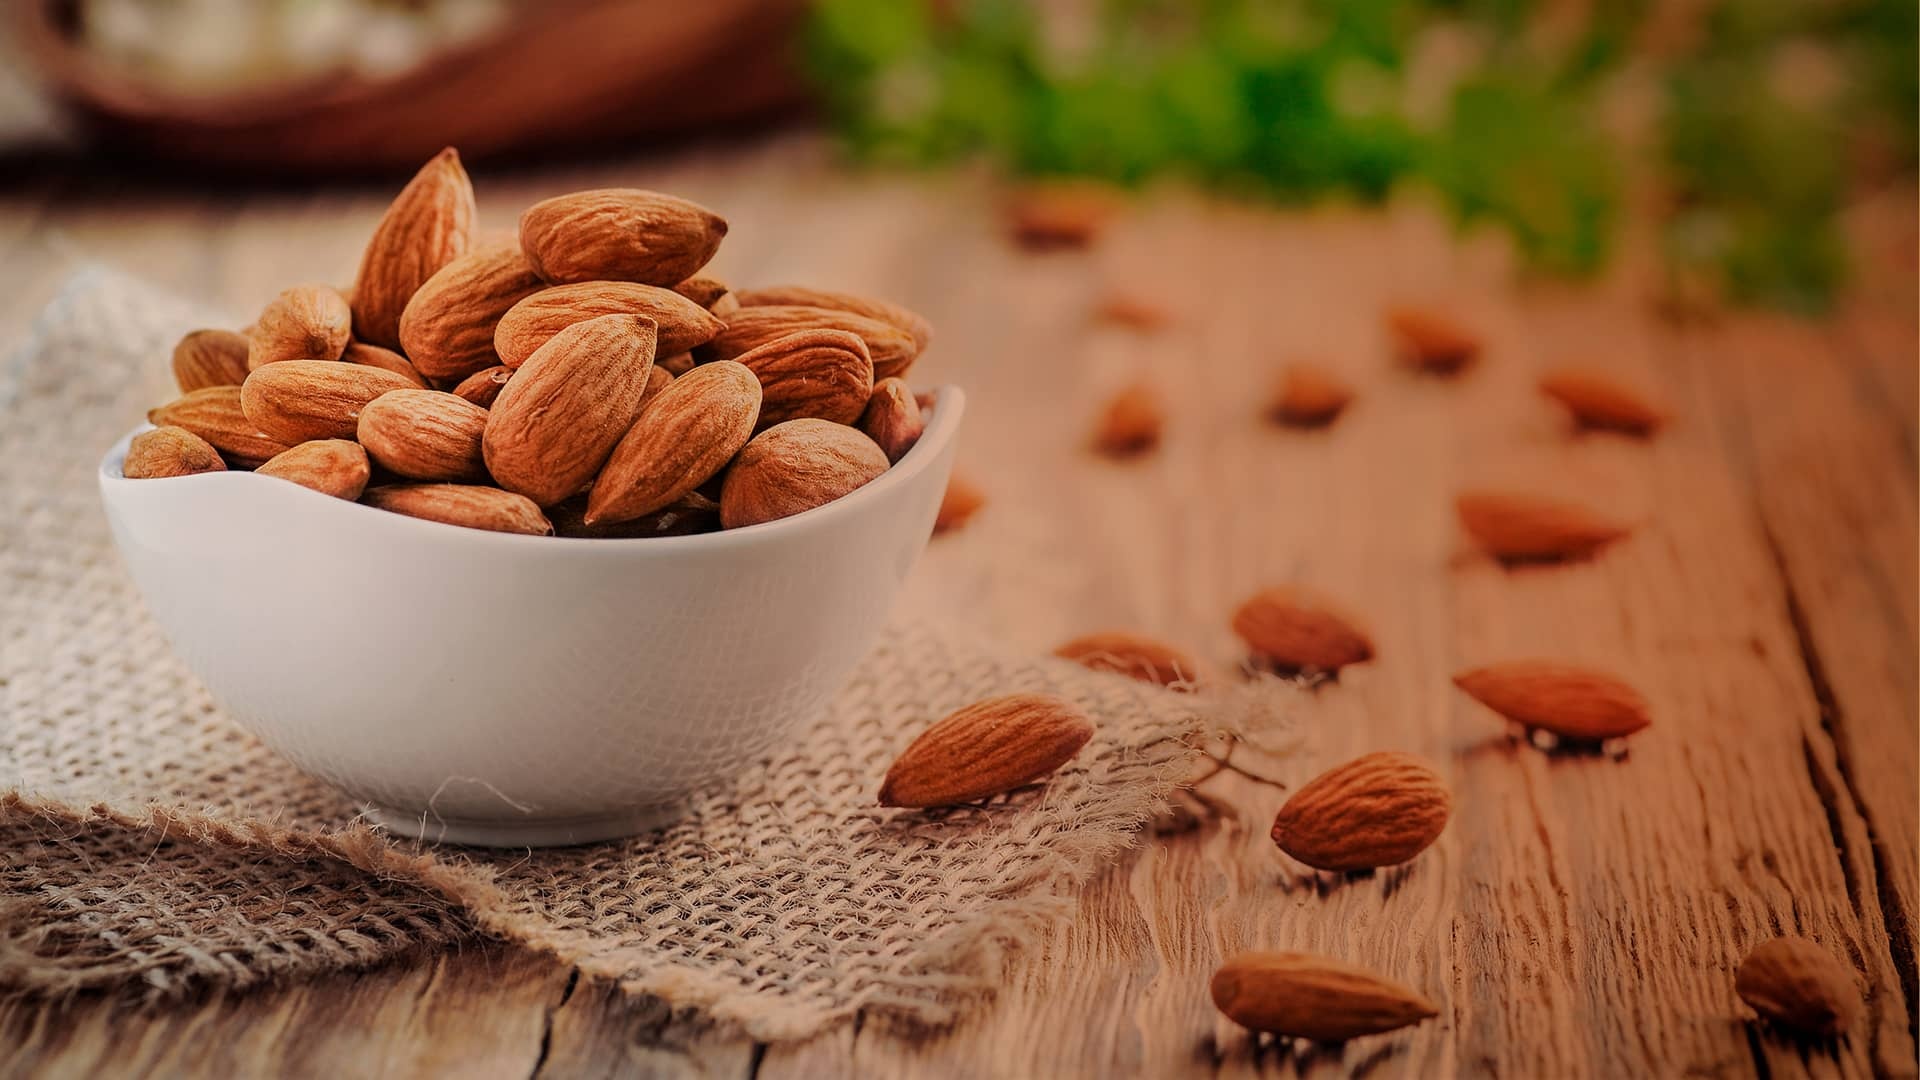 Almonds: One of the world's most loved tree nuts, Highly nutritious. 1920x1080 Full HD Background.